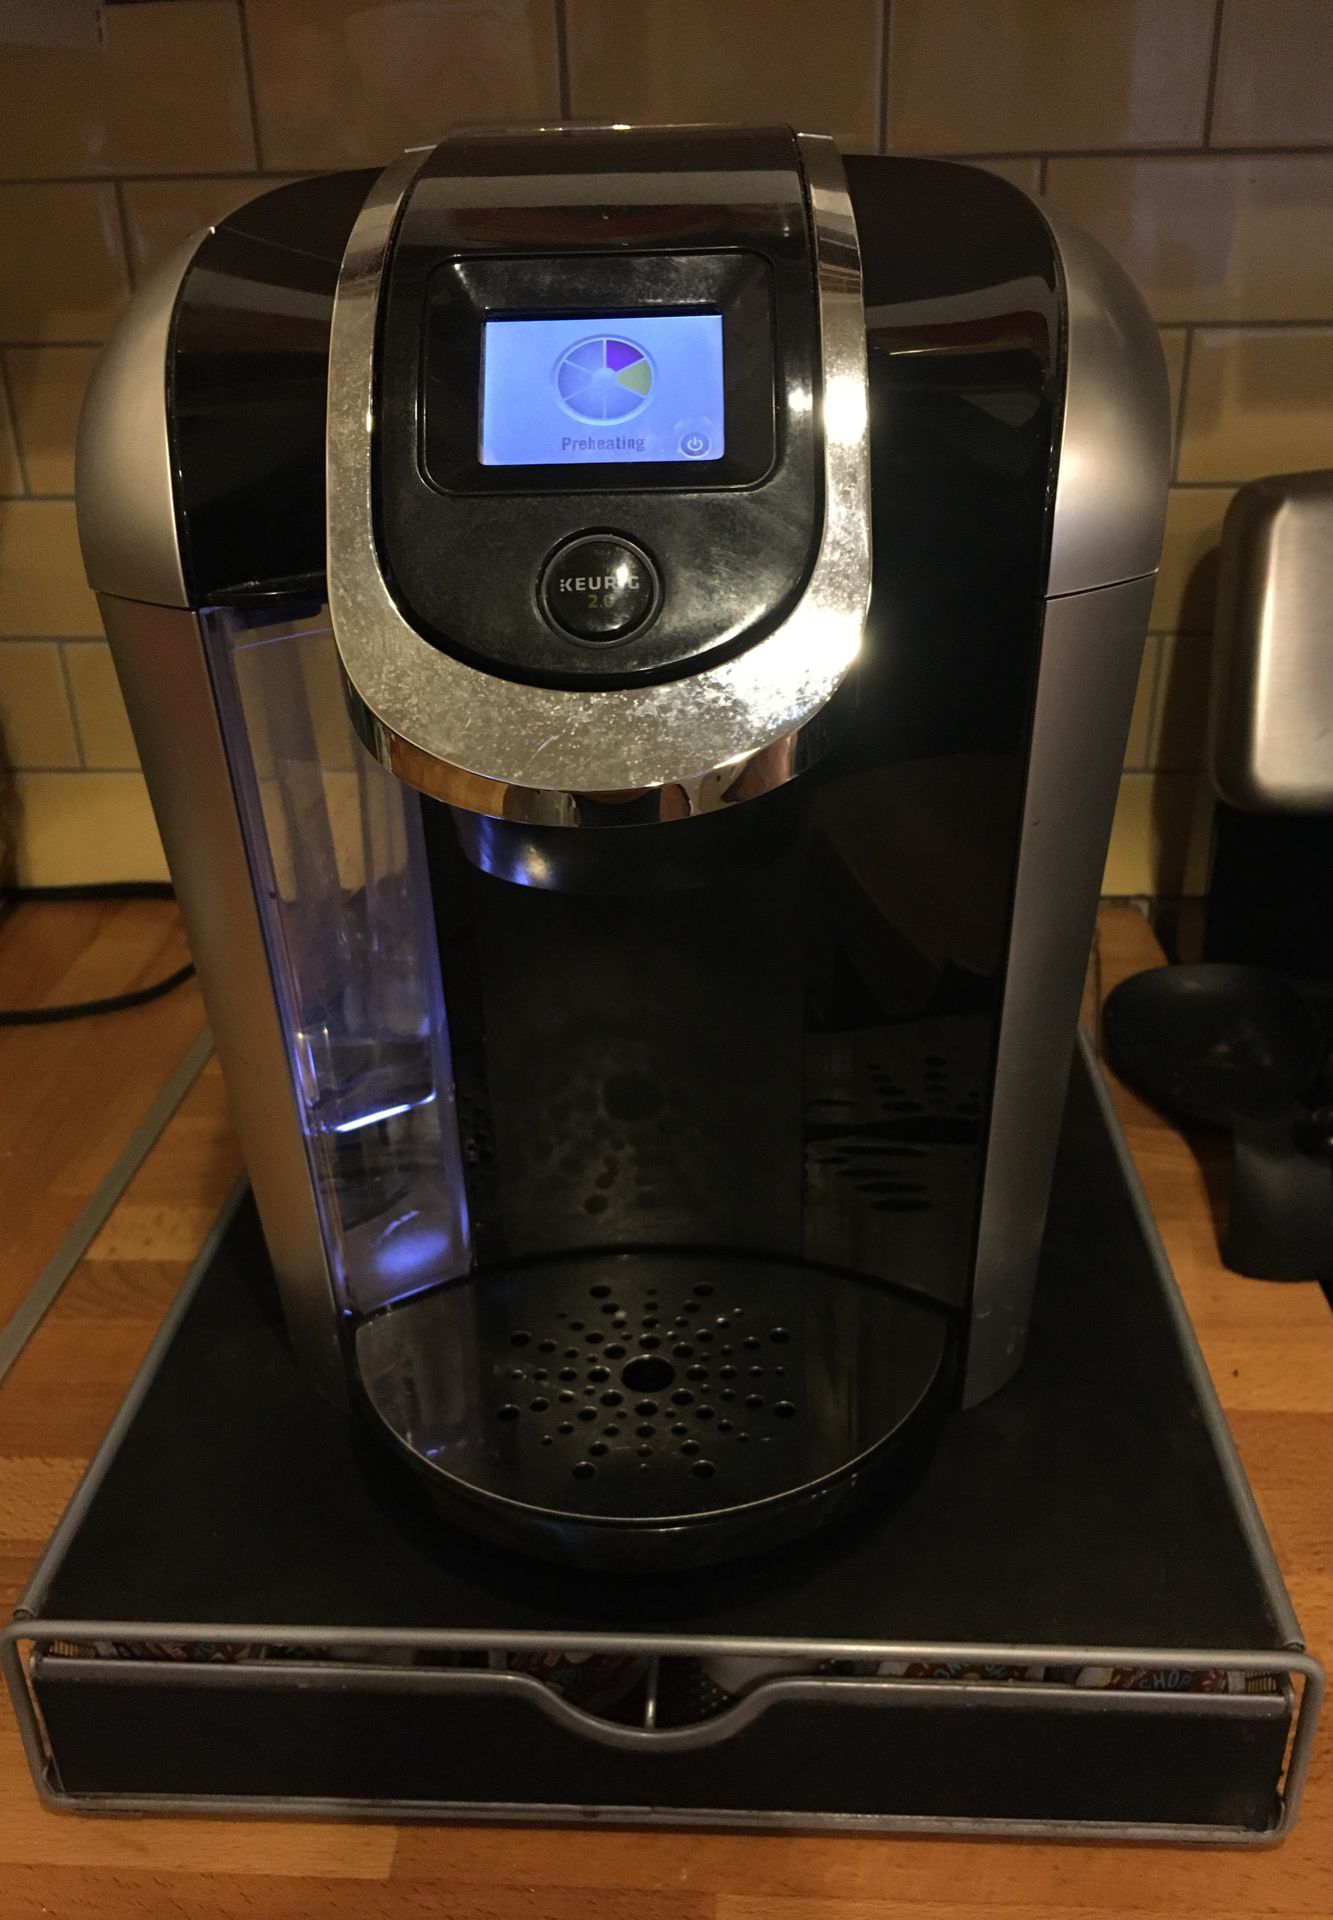 KEURIG 2.0 With kcup/ coffee tray. Great Condition!!!!